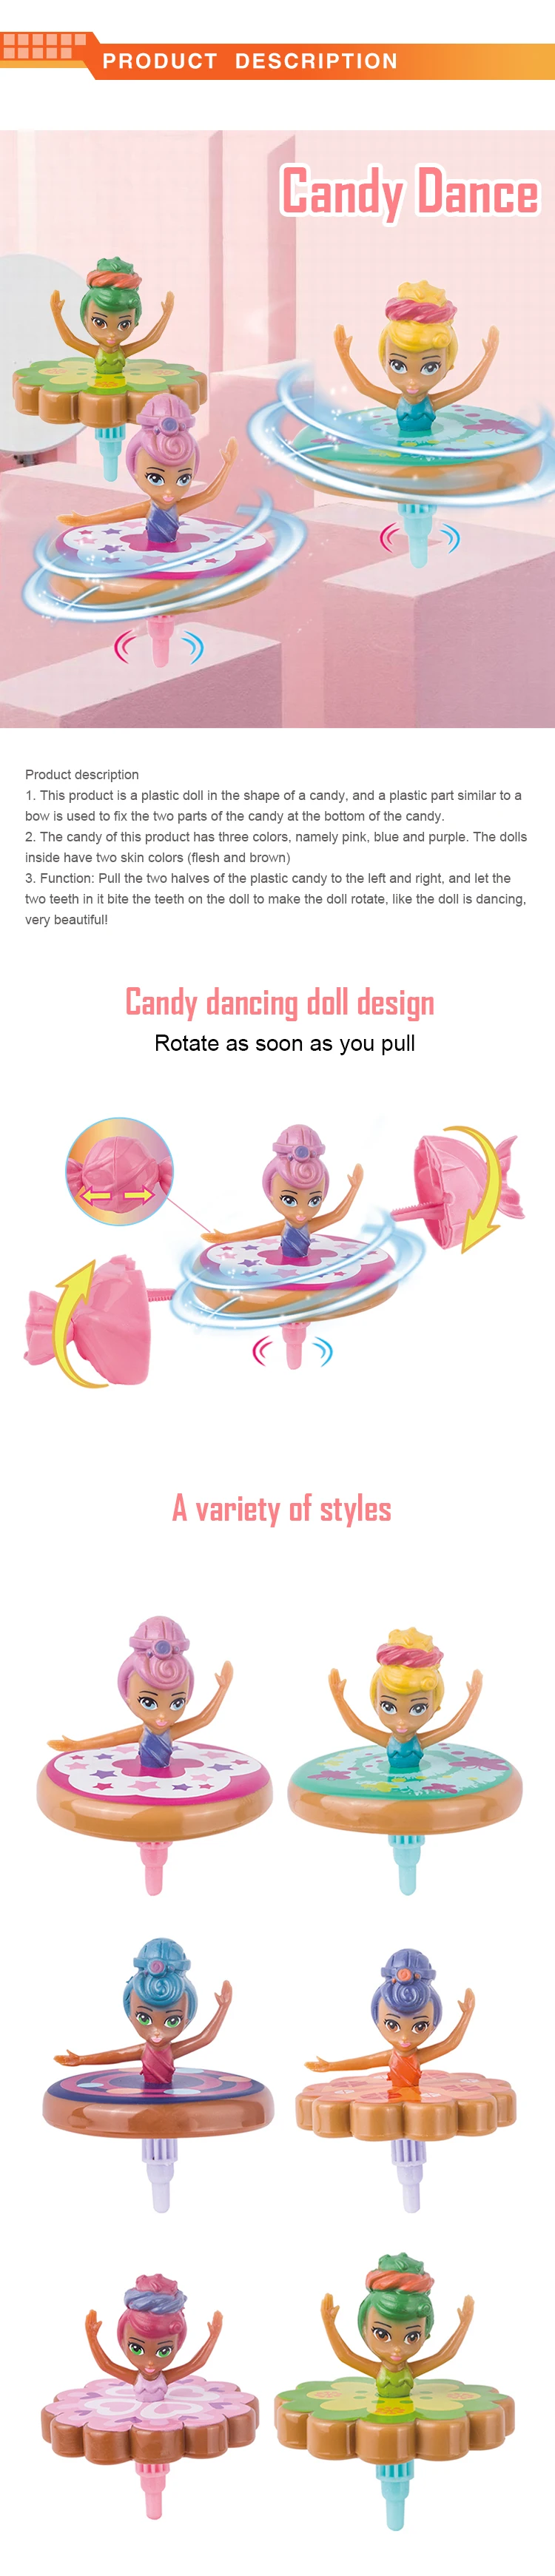 2020 New Arrival Plastic Candy Spiral Rotating Dancing Surprise Blind Box Candy Dancing Doll